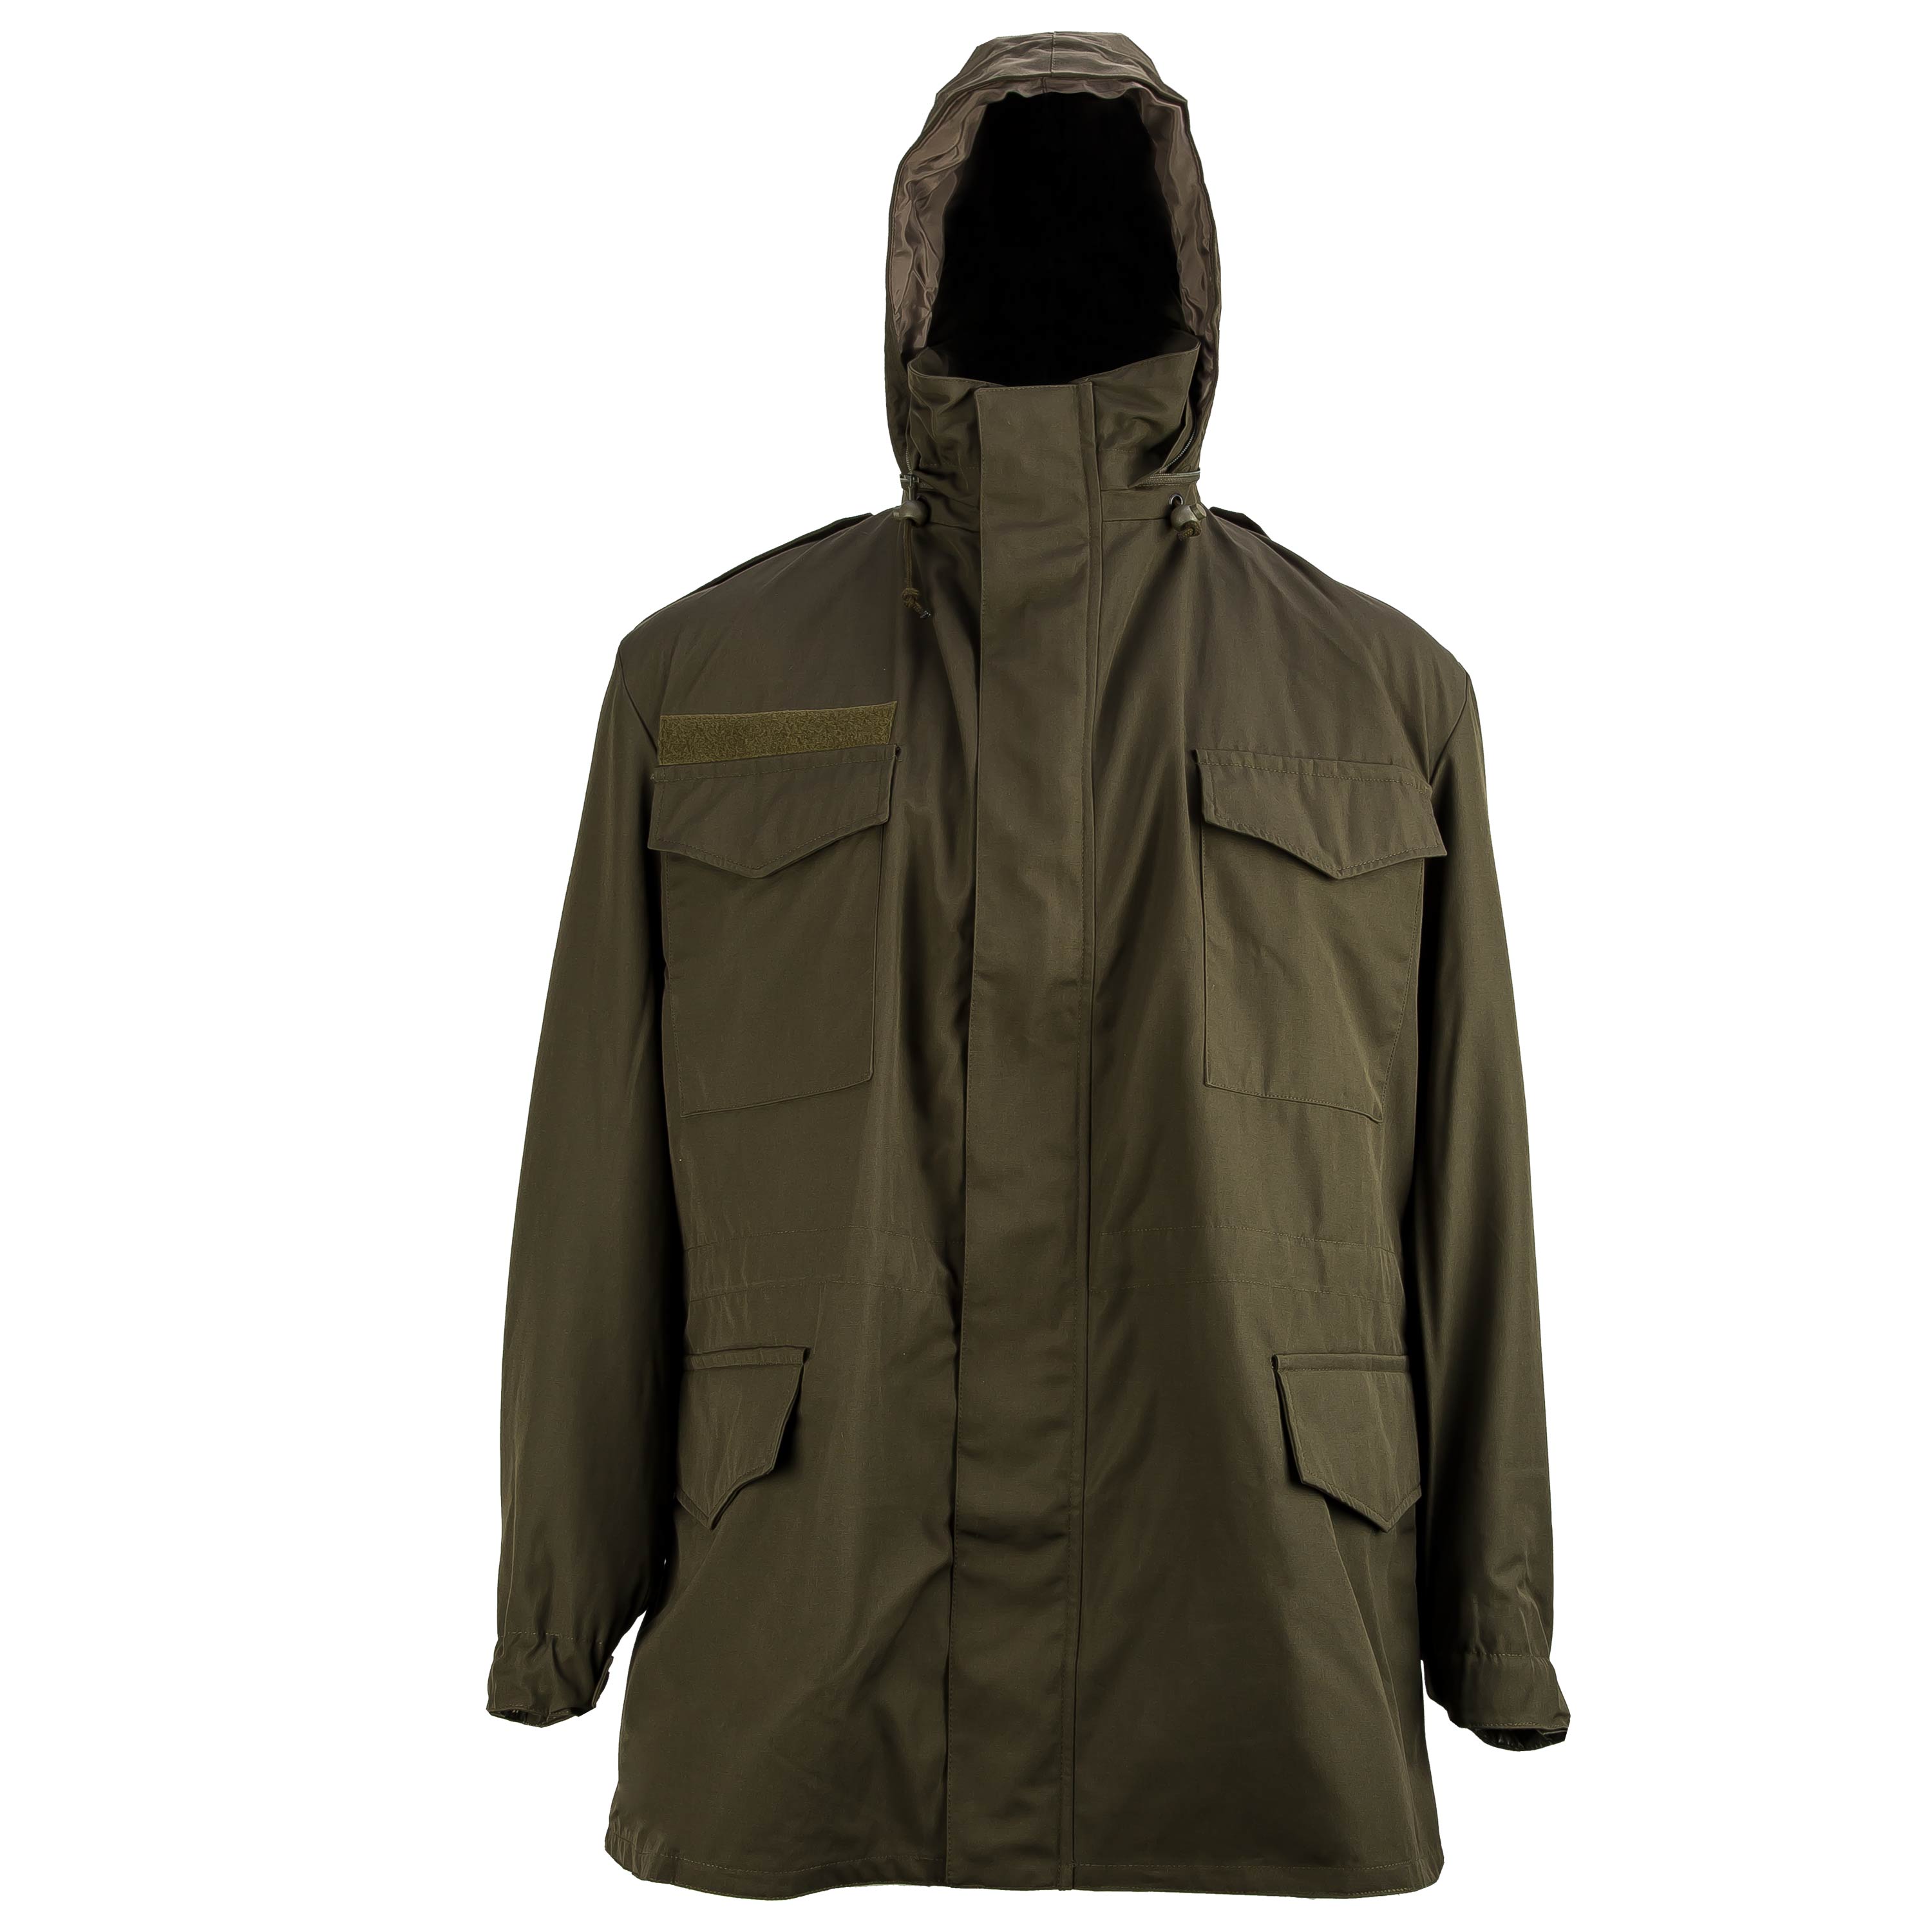 Purchase the Austrian Army Goretex Rain Jacket Like New olive by